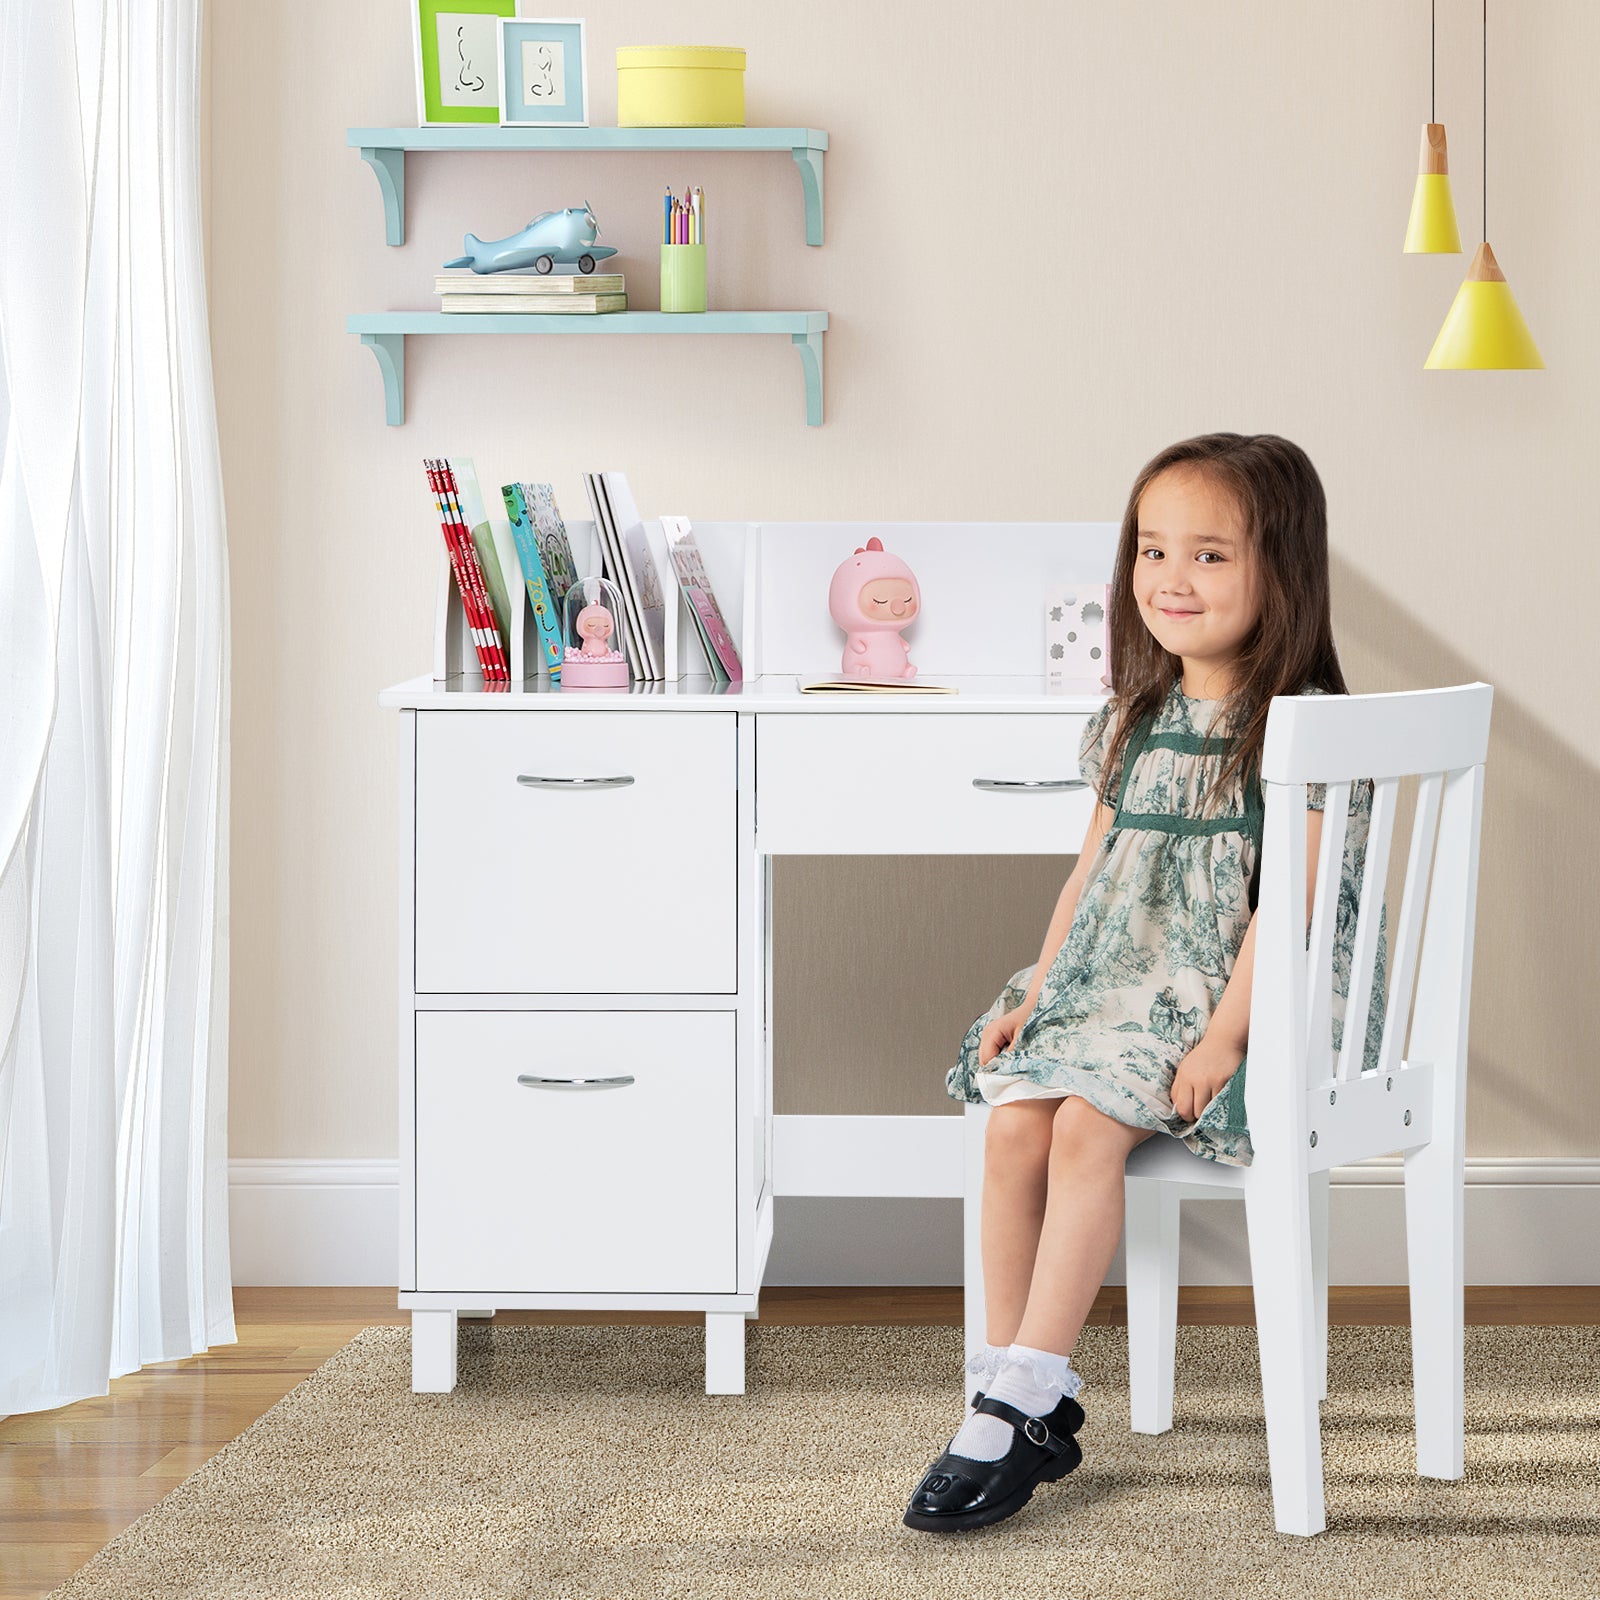 Quality Learning Furniture for Kids